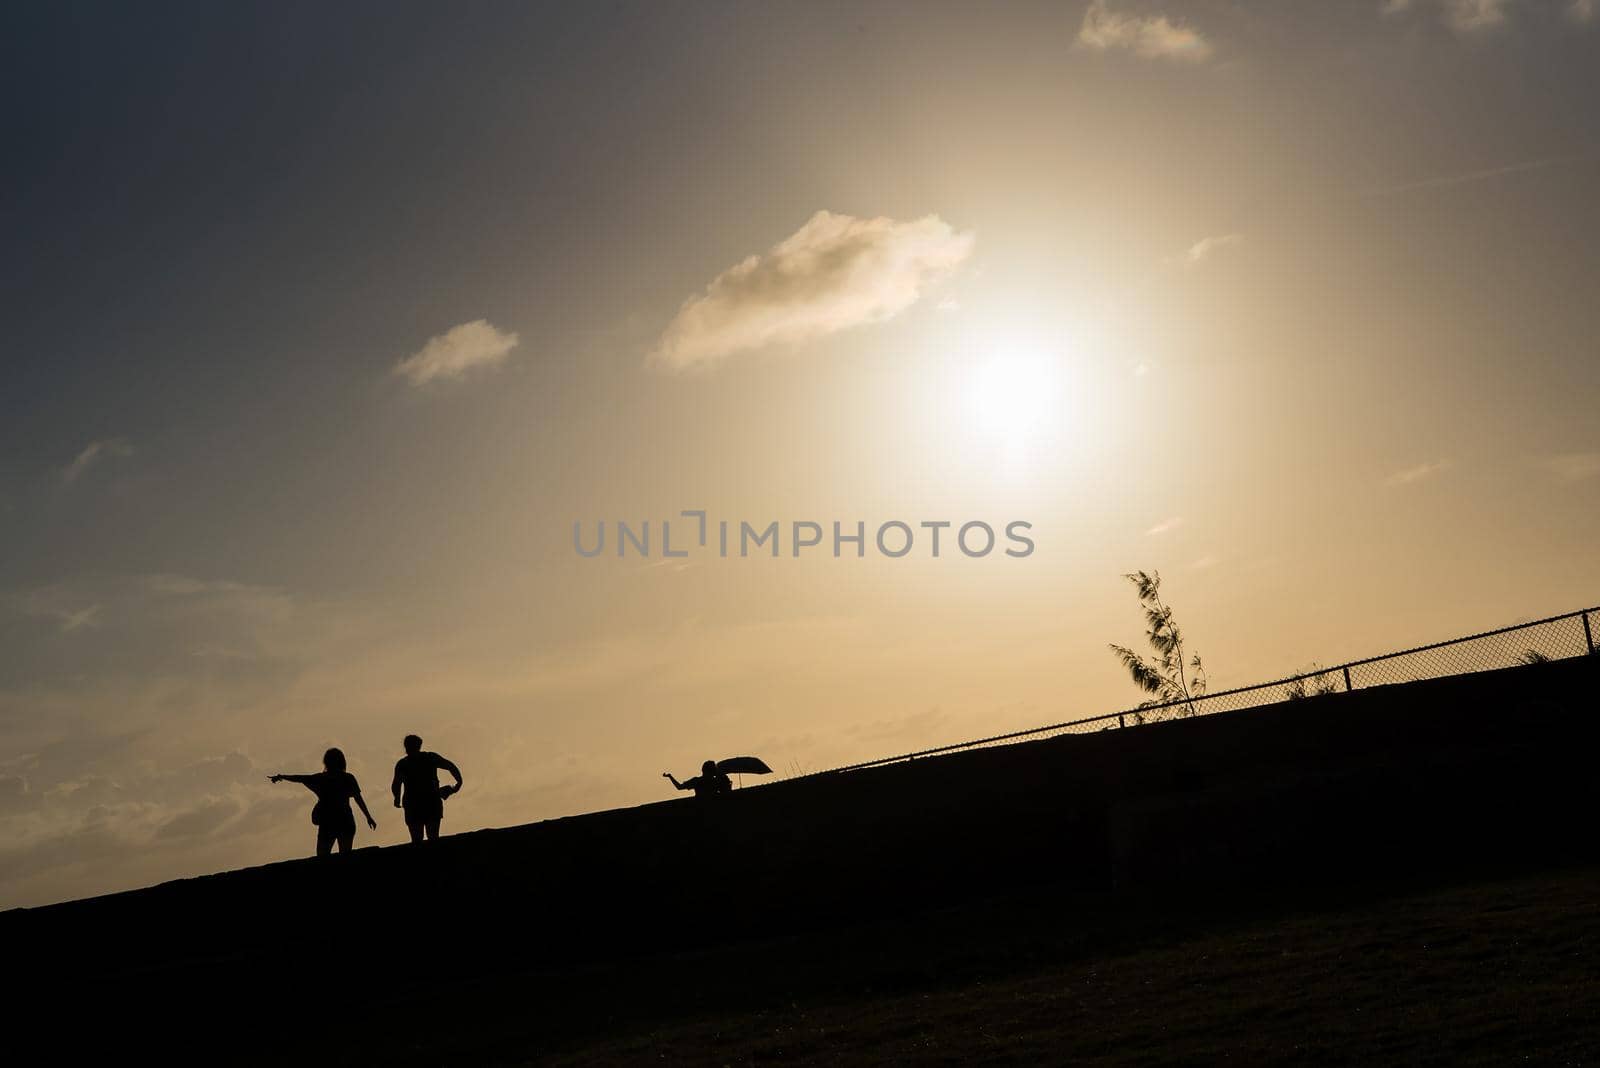 Lifestyle image of two people standing together with one pointing their finger up during sunset in San Juan, Puerto Rico. Warm tones by jyurinko